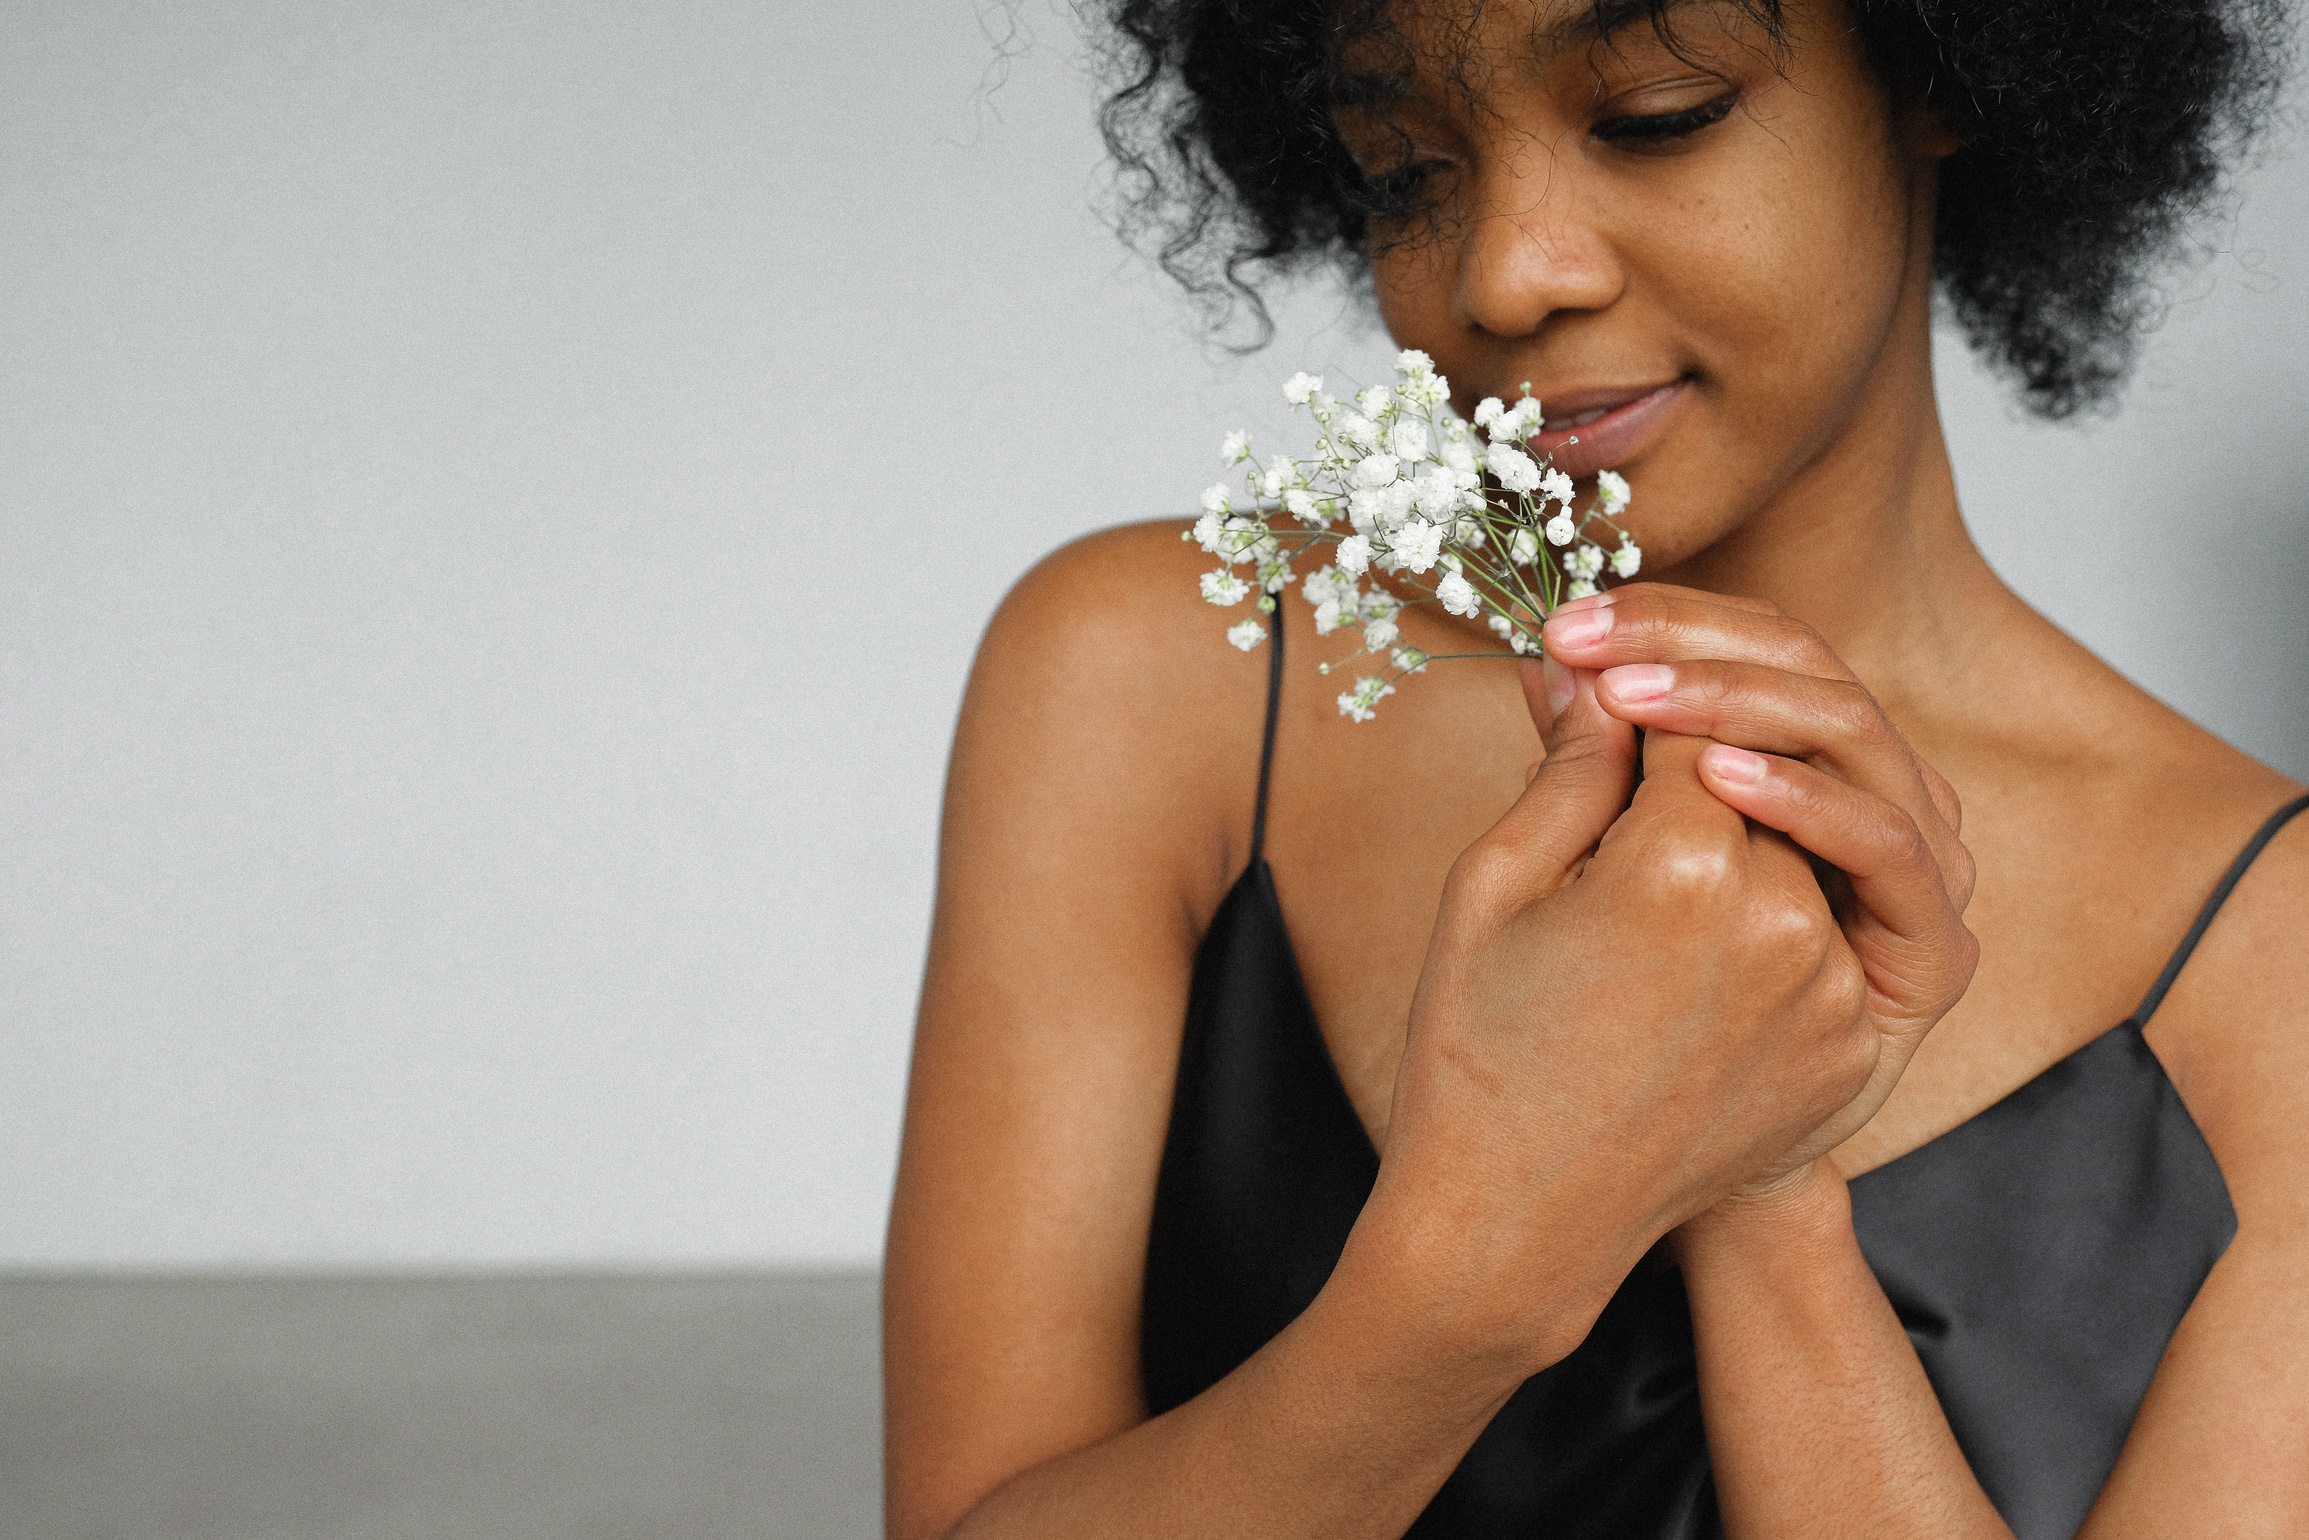 Woman in Black Tank Top Holding Baby's Breath flowers